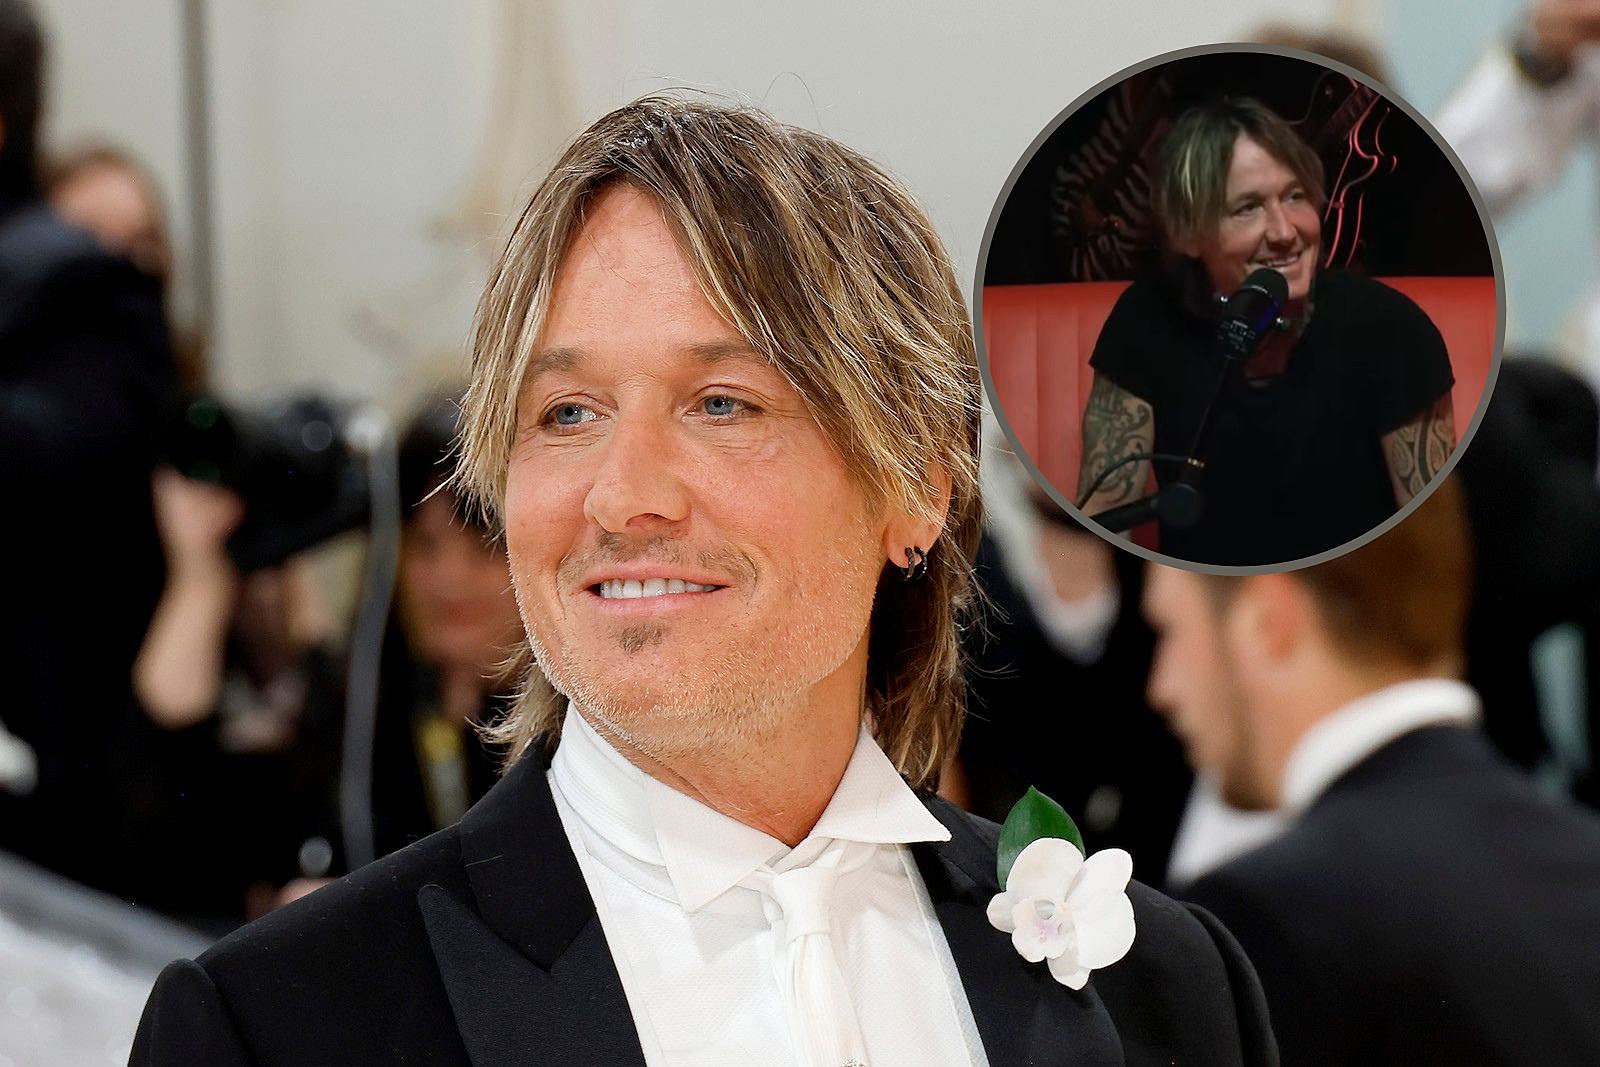 Keith Urban Says He’d Be ‘In Jail’ If He Hadn’t Gone Into
Music